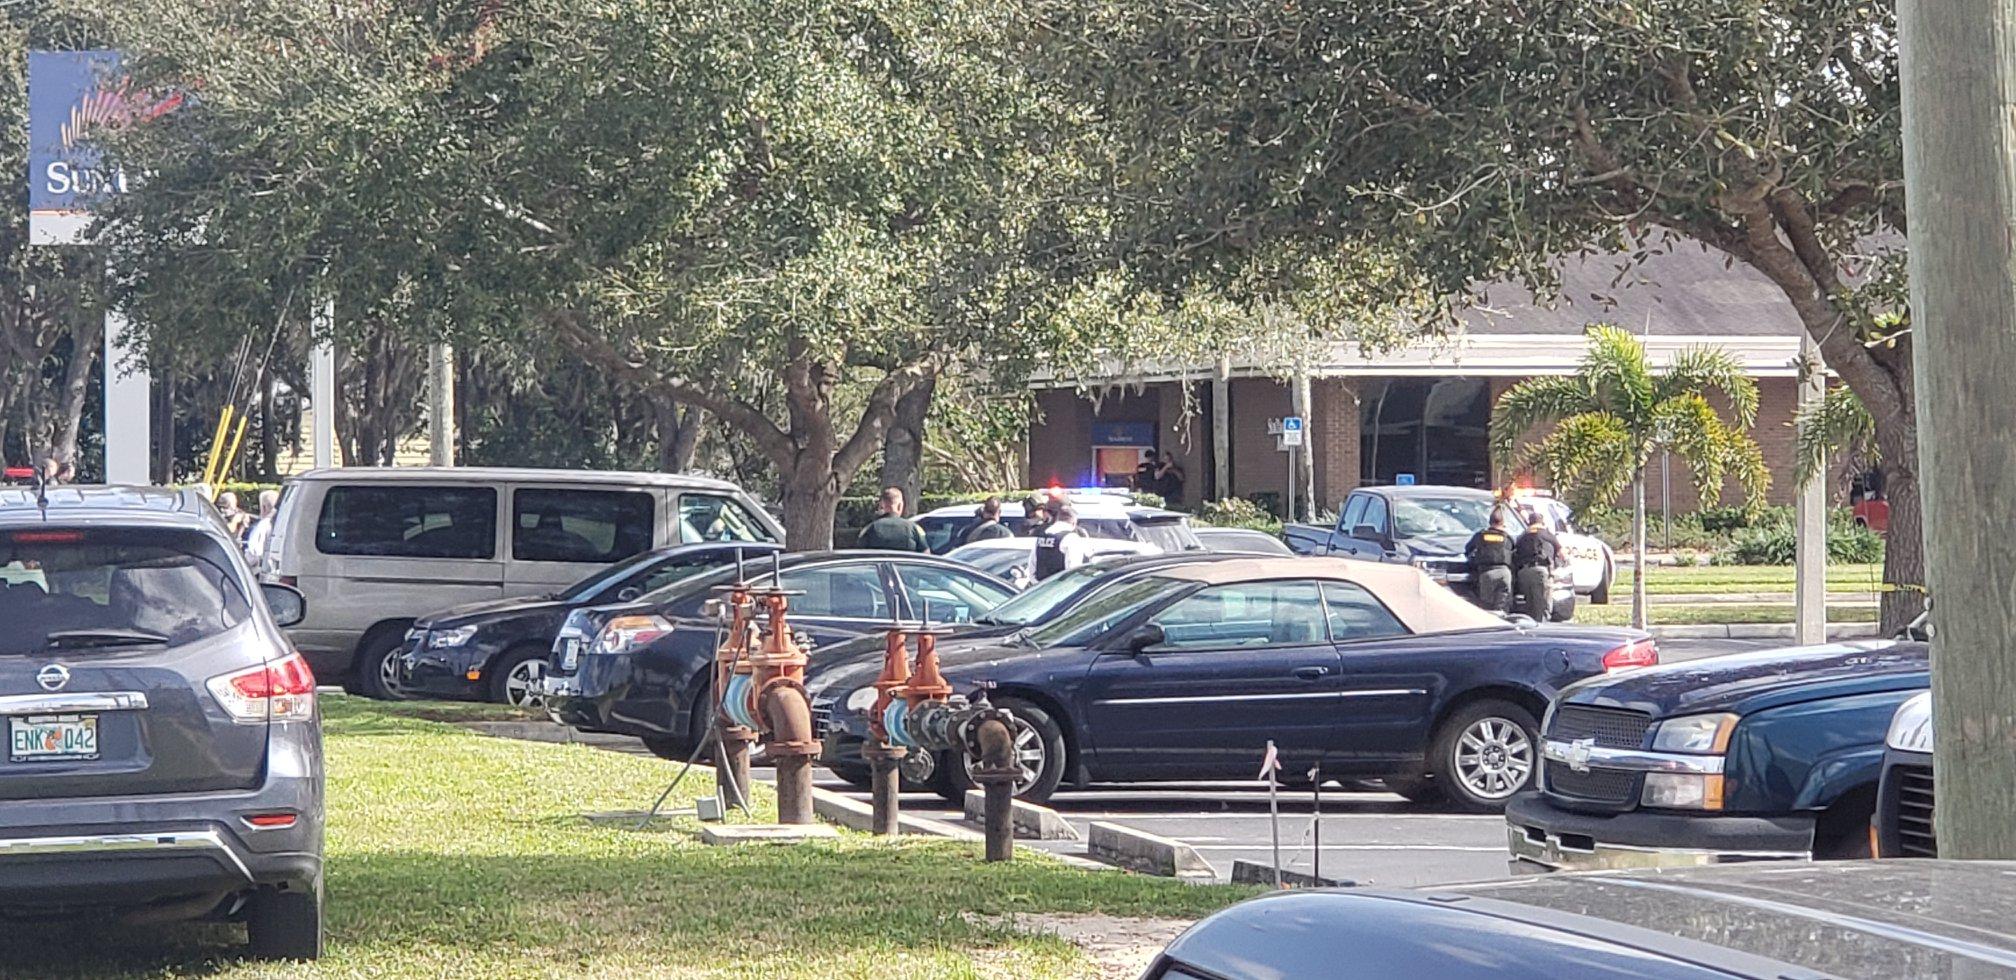 At least 5 shot dead in hostage situation at Florida bank